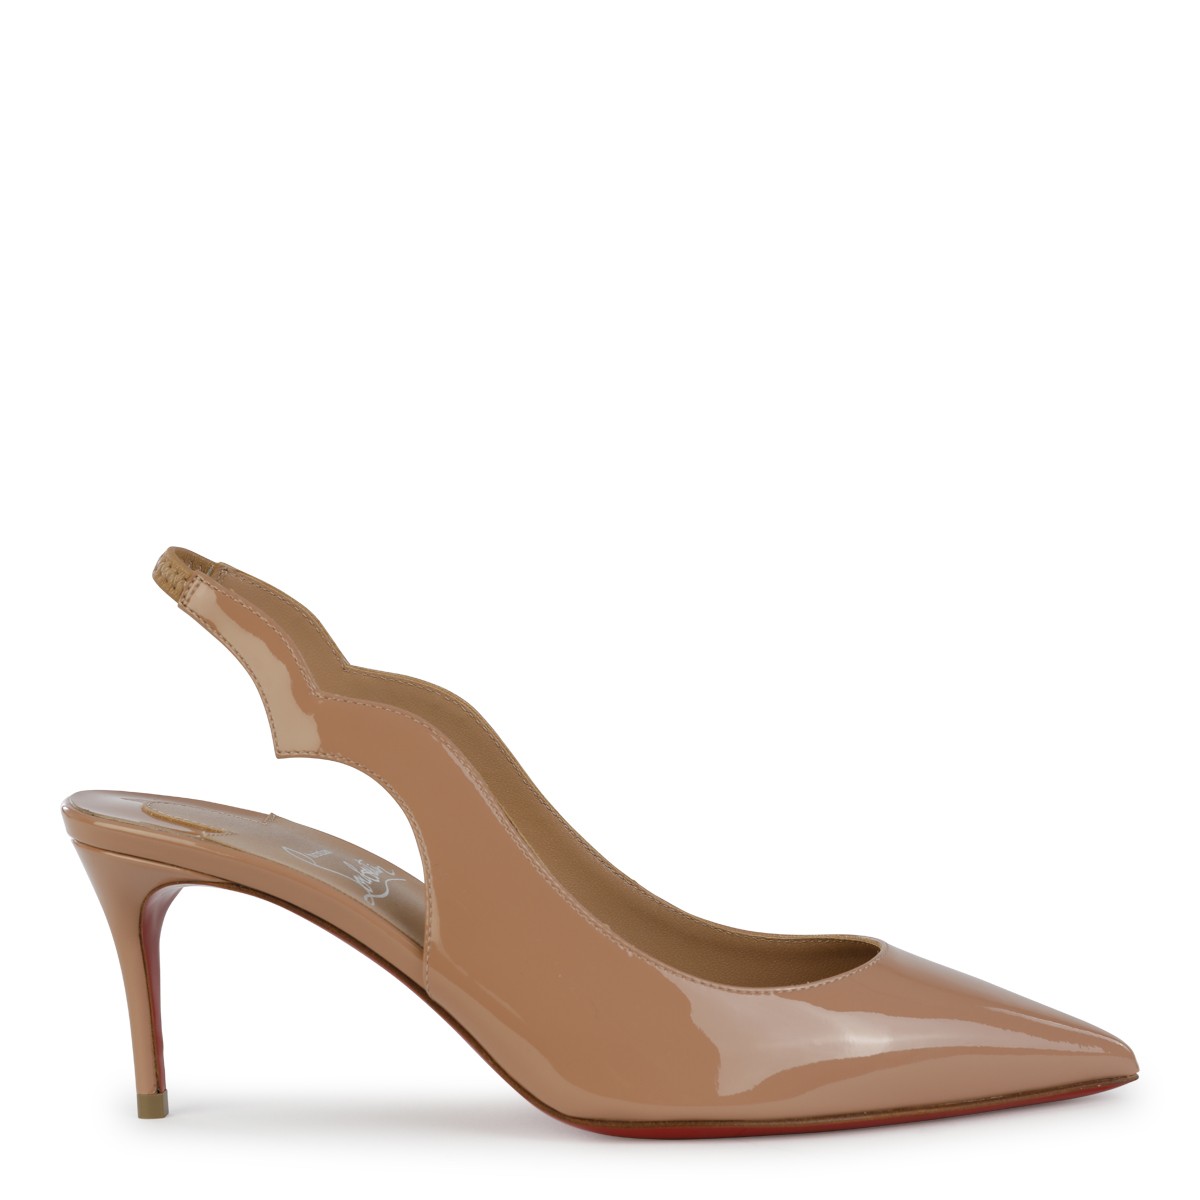 NUDE HOT CHICK SLING PUMPS